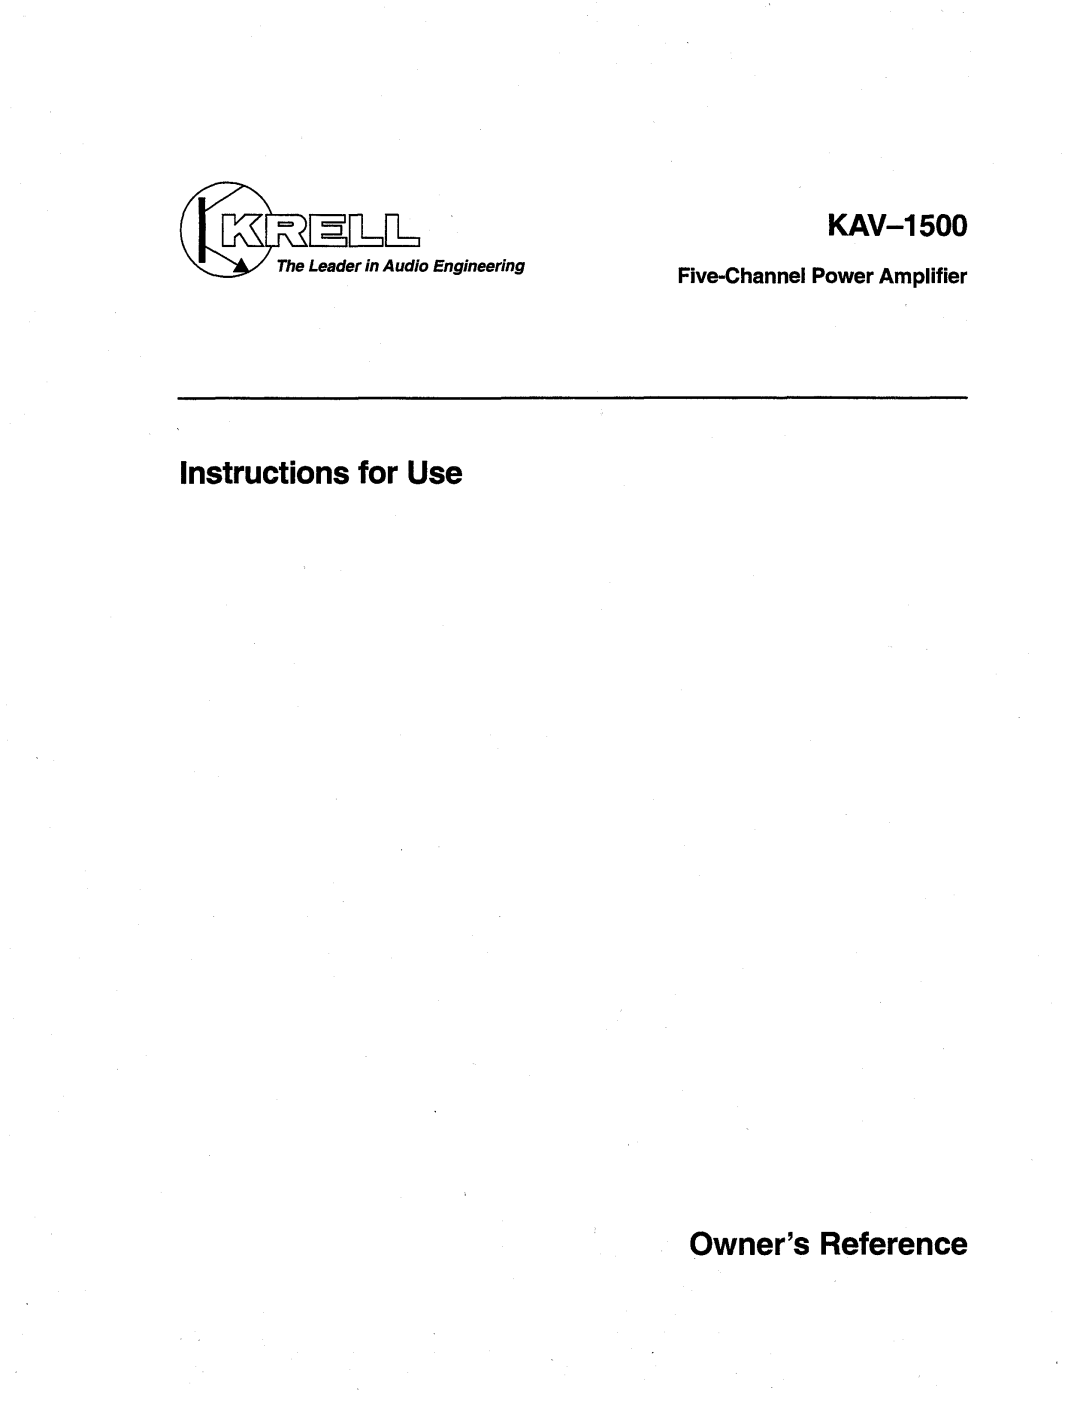 Krell Industries KAV-1500 manual Instructions for Use, Owners Reference 